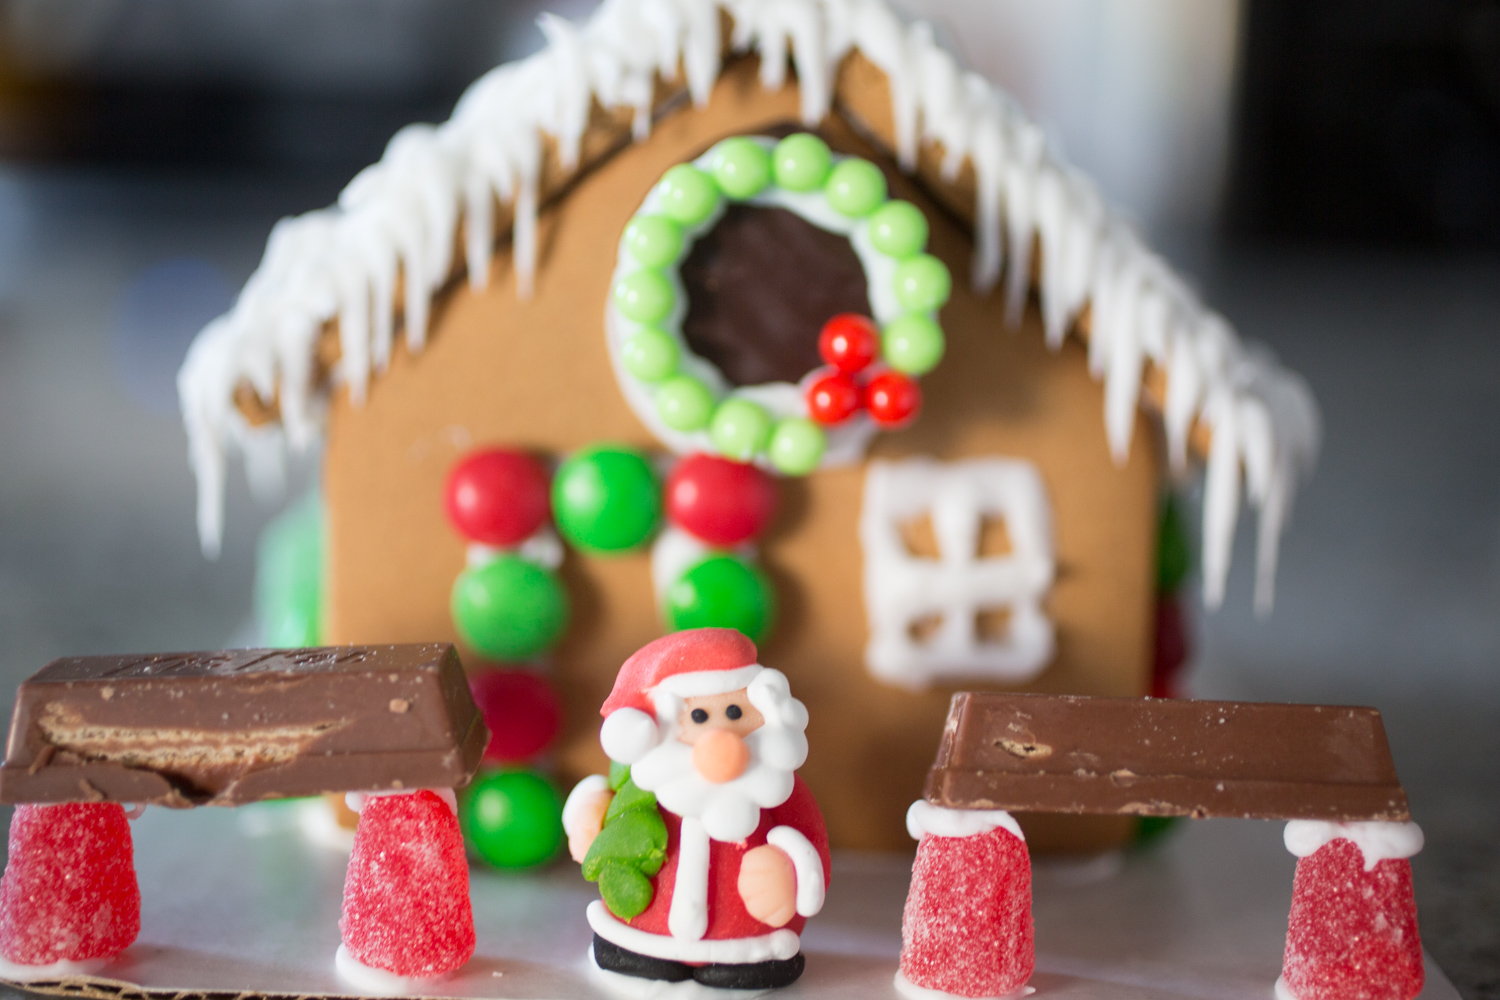 His and Her style blog- Building a gingerbread house